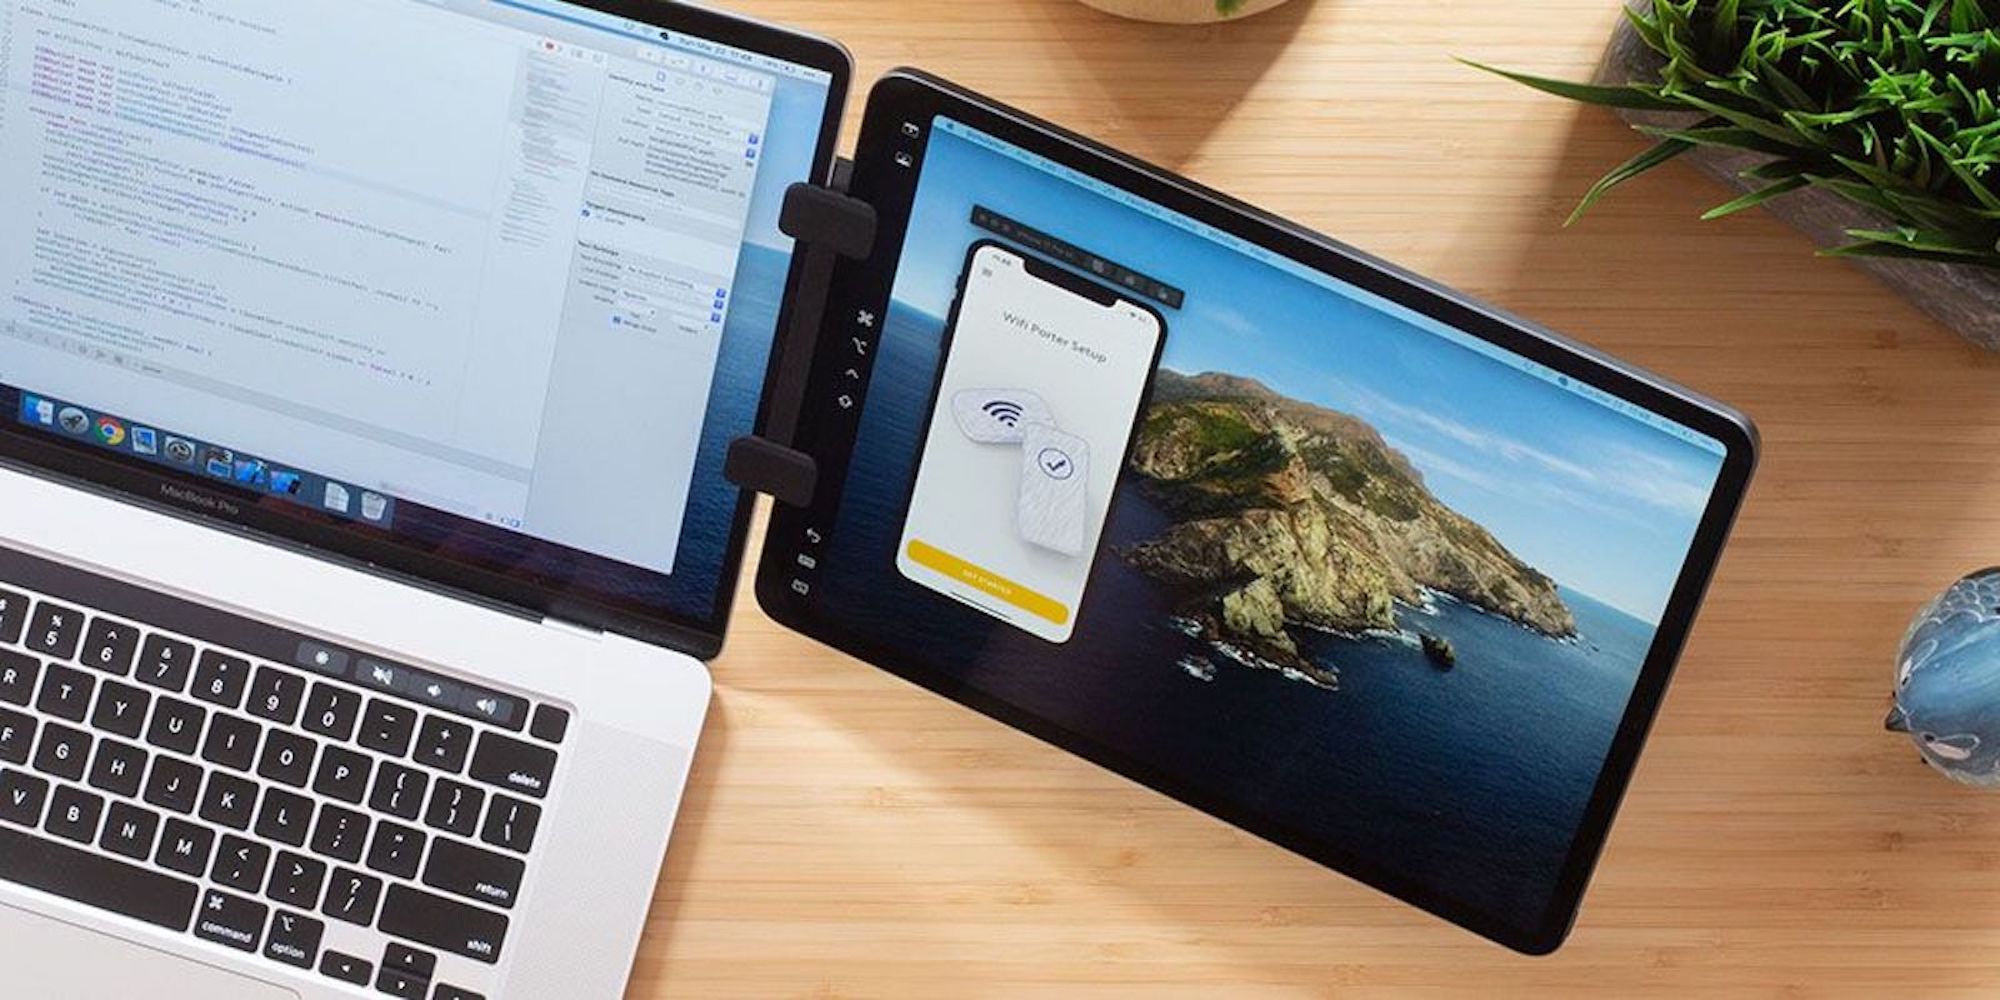 Turn your iPad into a second screen for your MacBook with Mountie Plus